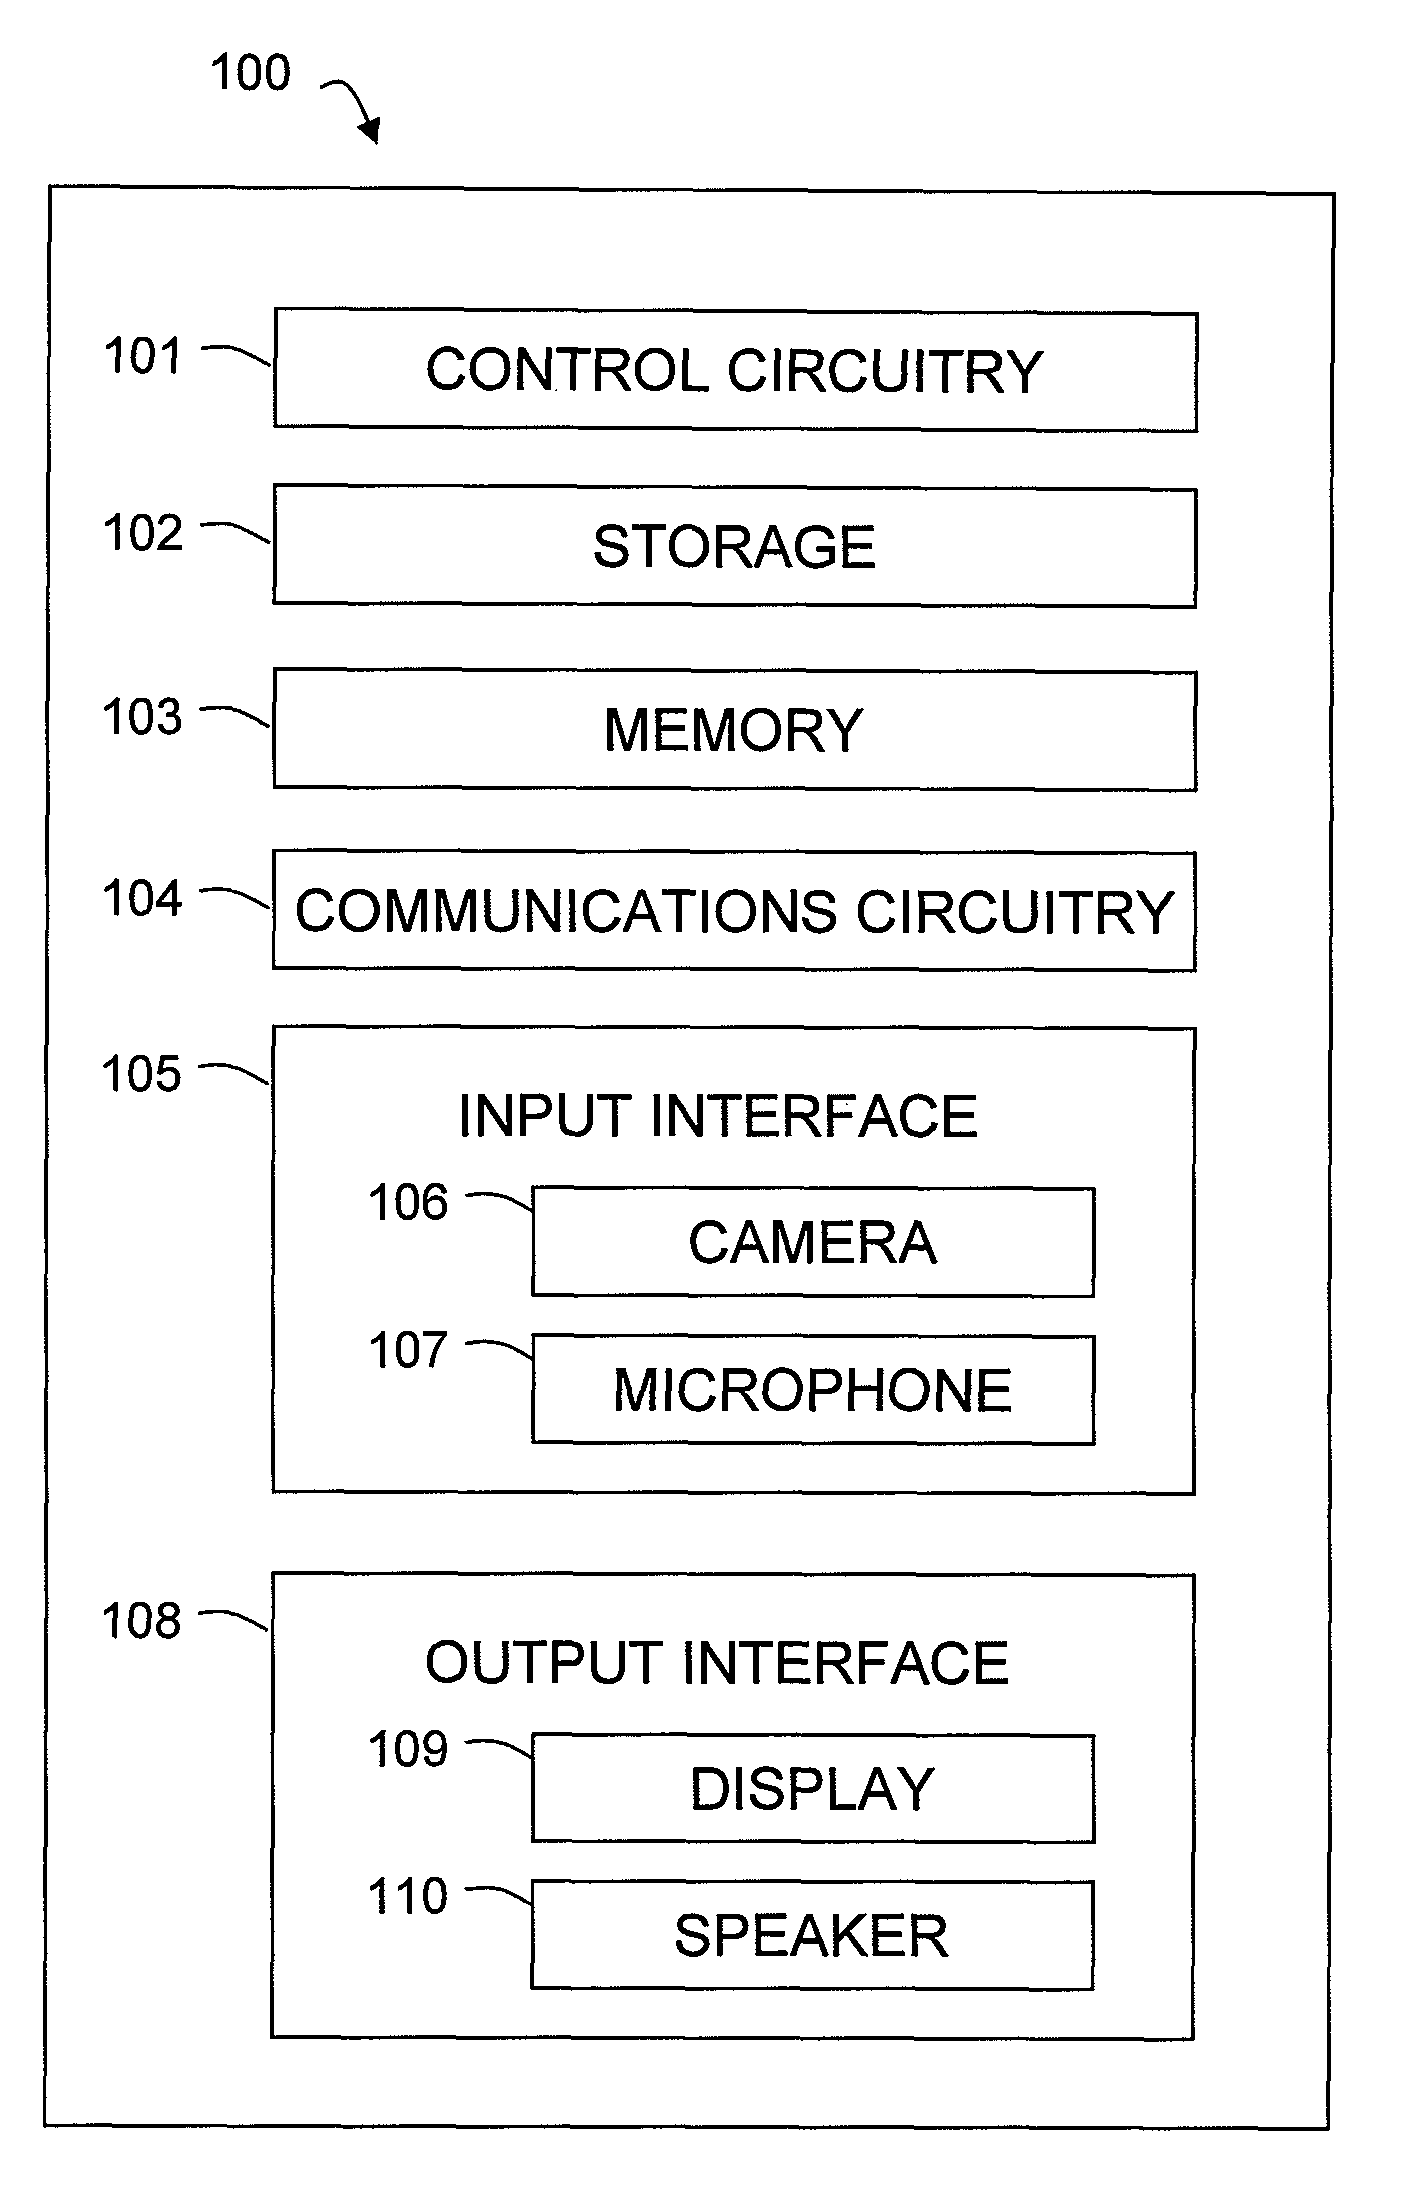 Multiparty communications systems and methods that optimize communications based on mode and available bandwidth